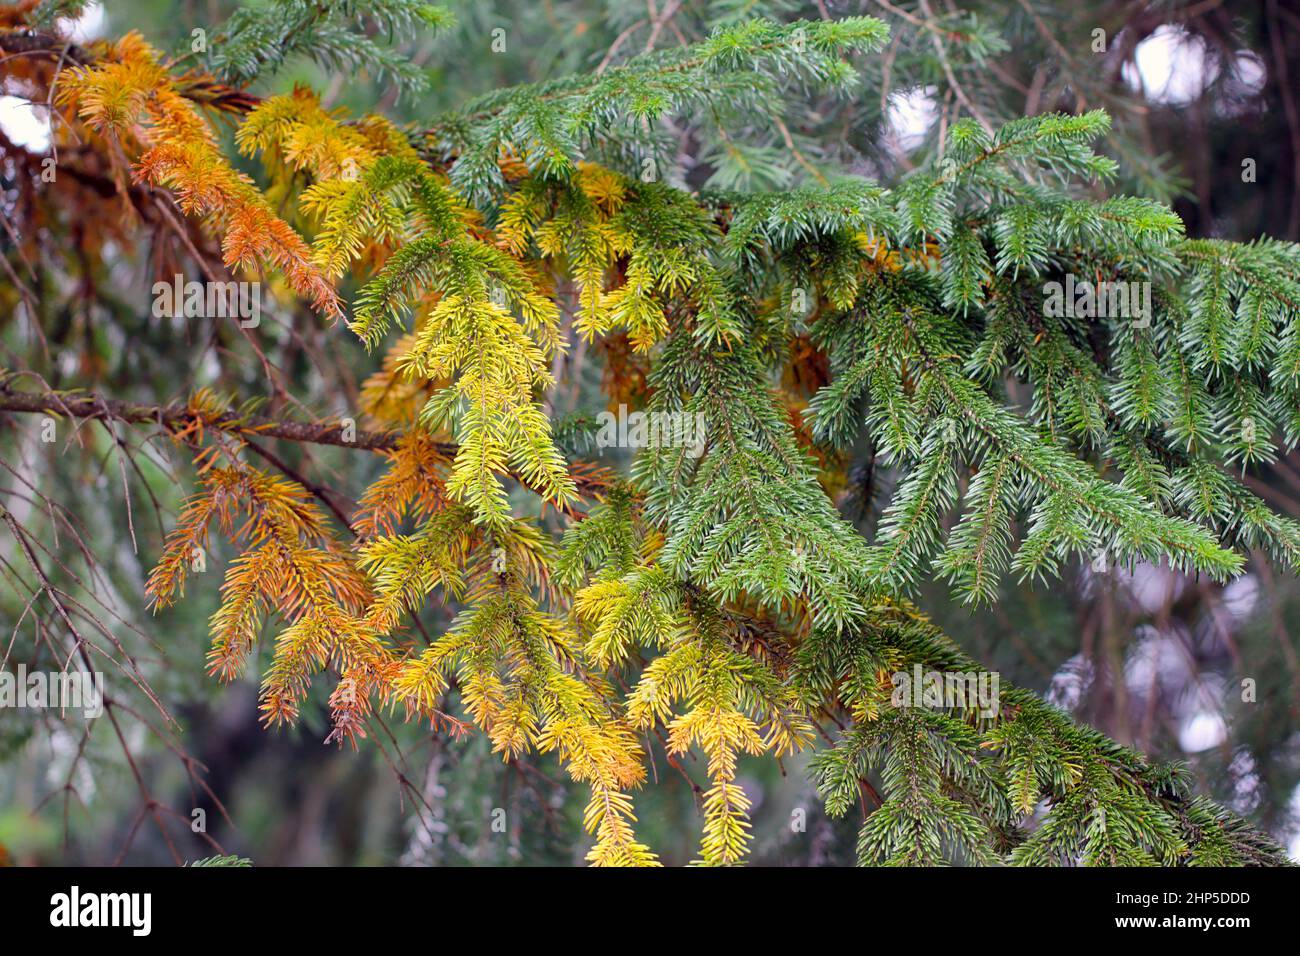 Fir tree dying due to aphid injury. Withering ornamental tree in the garden. Stock Photo